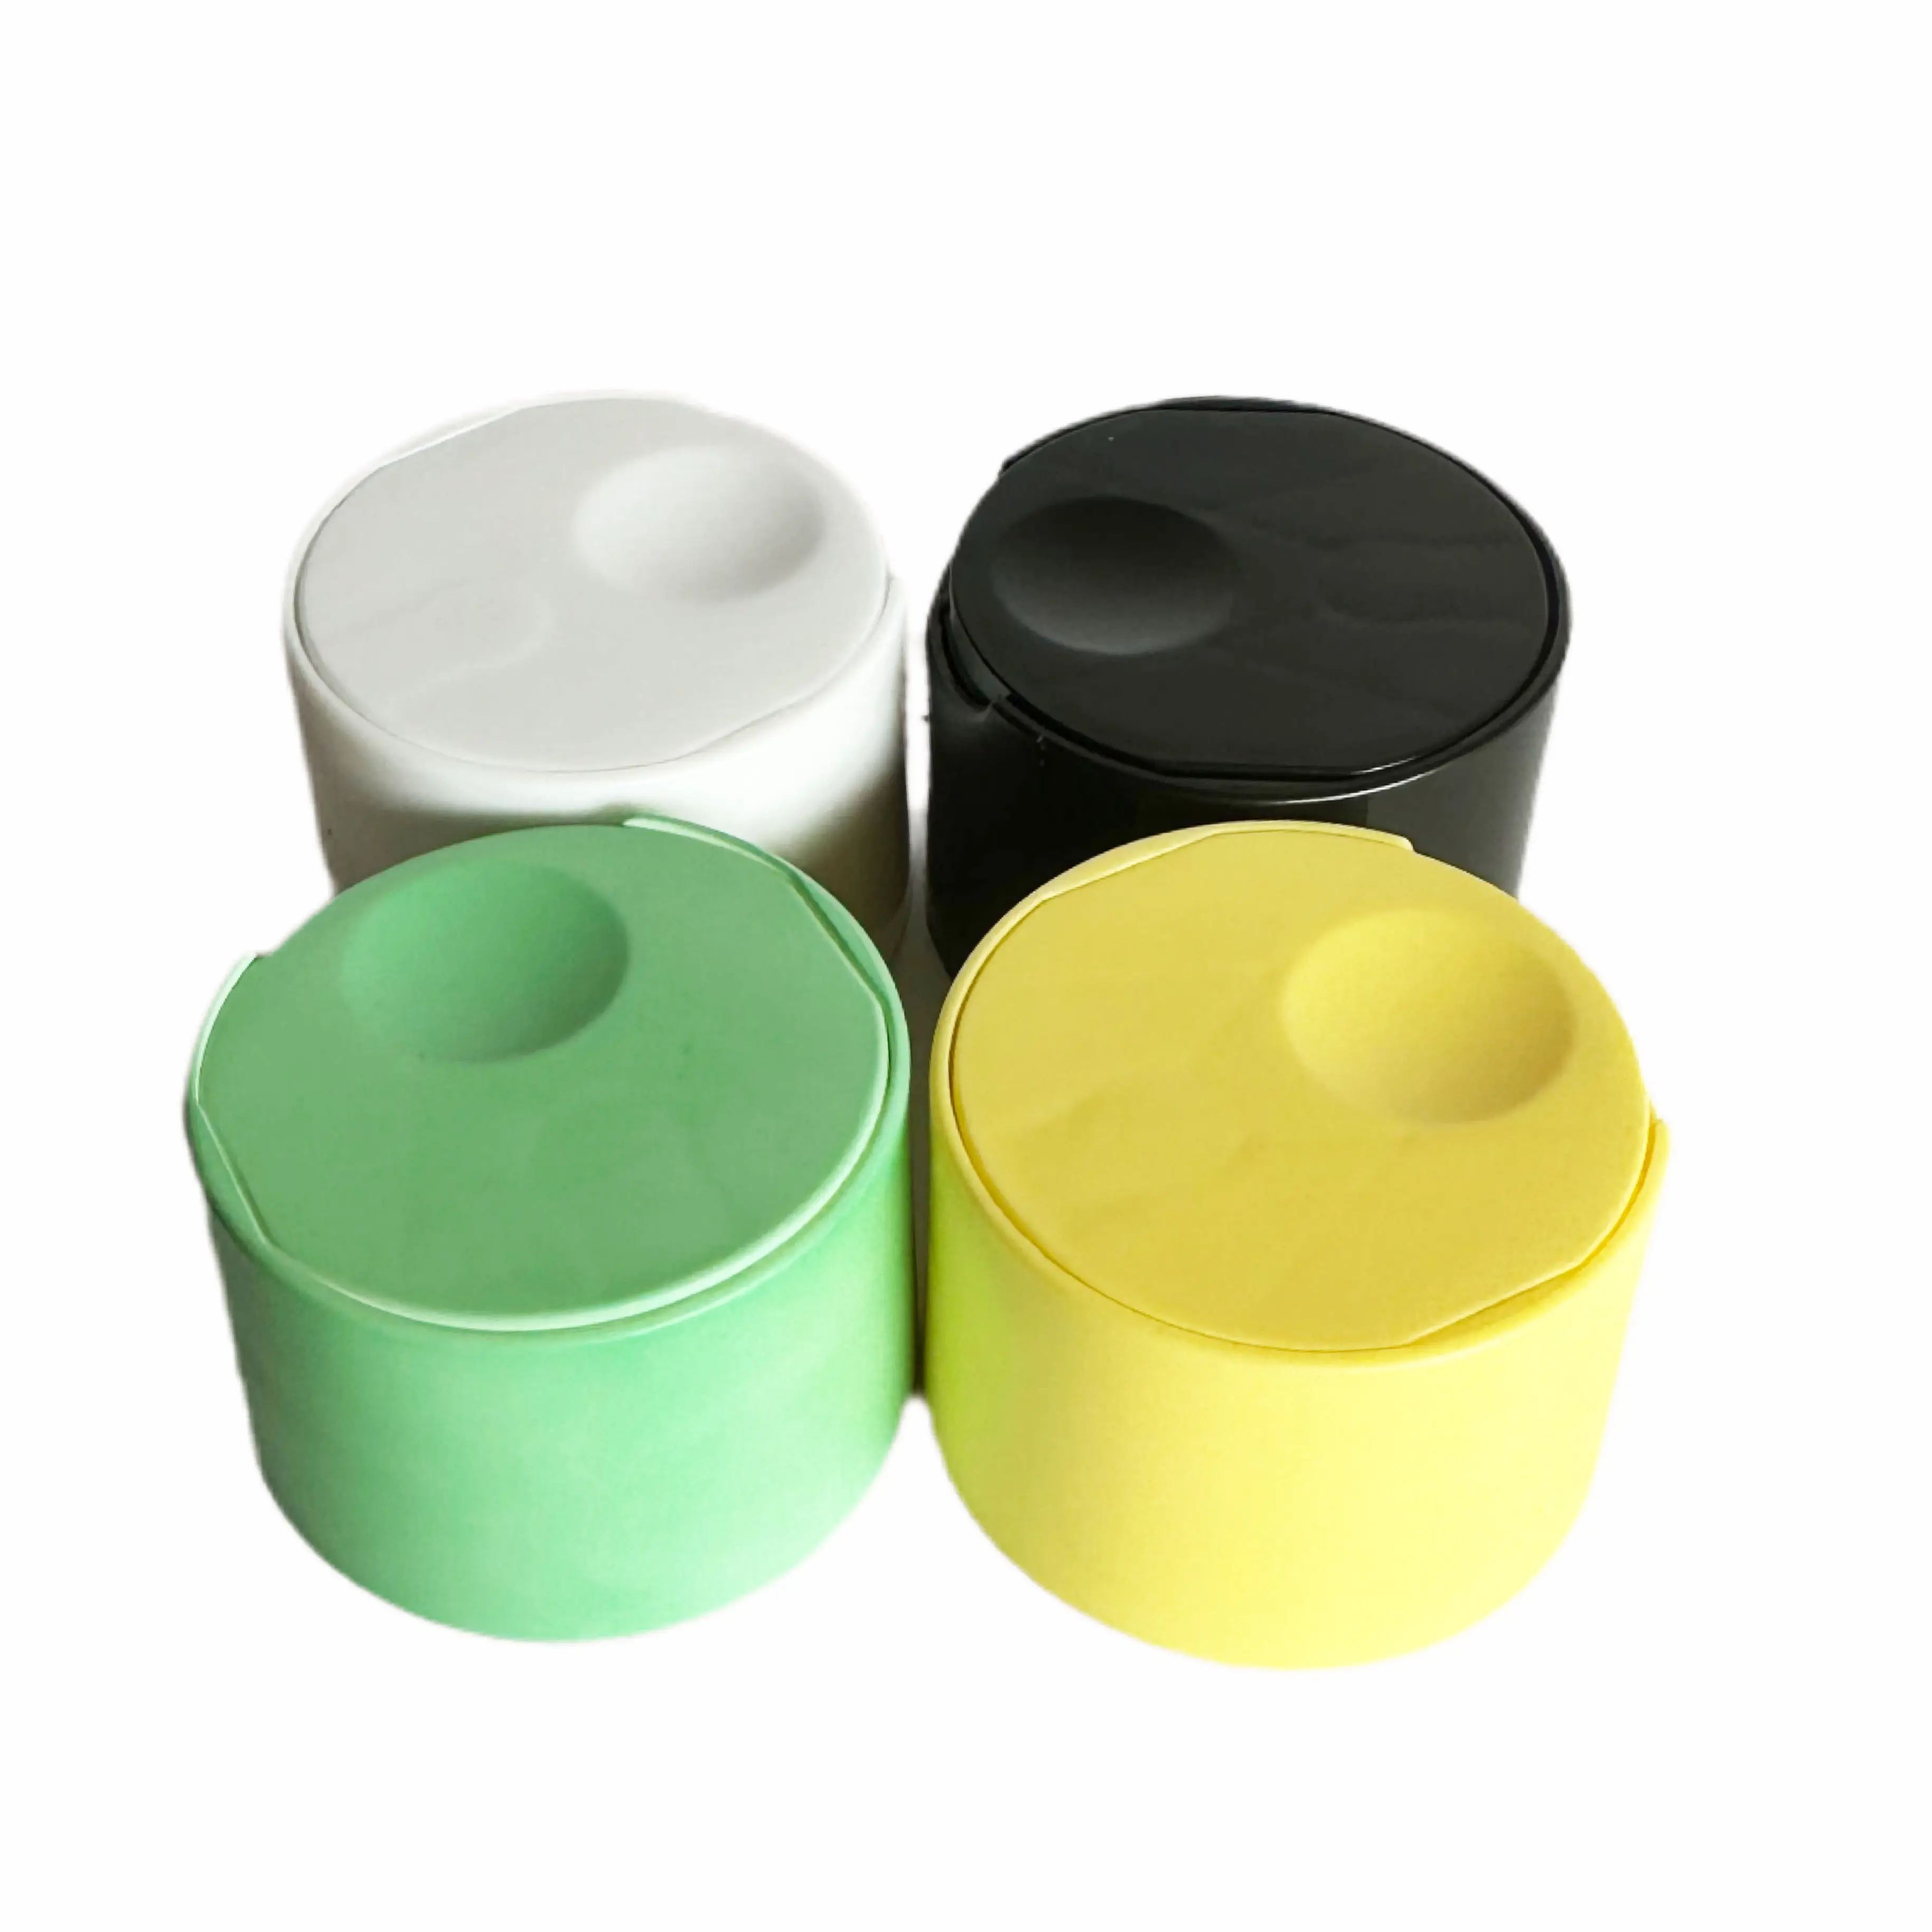 Stock 24/410 White Black Clear Plastic Dispensing Caps Double Wall Press Disc Top Cap For Shampoo Bottle